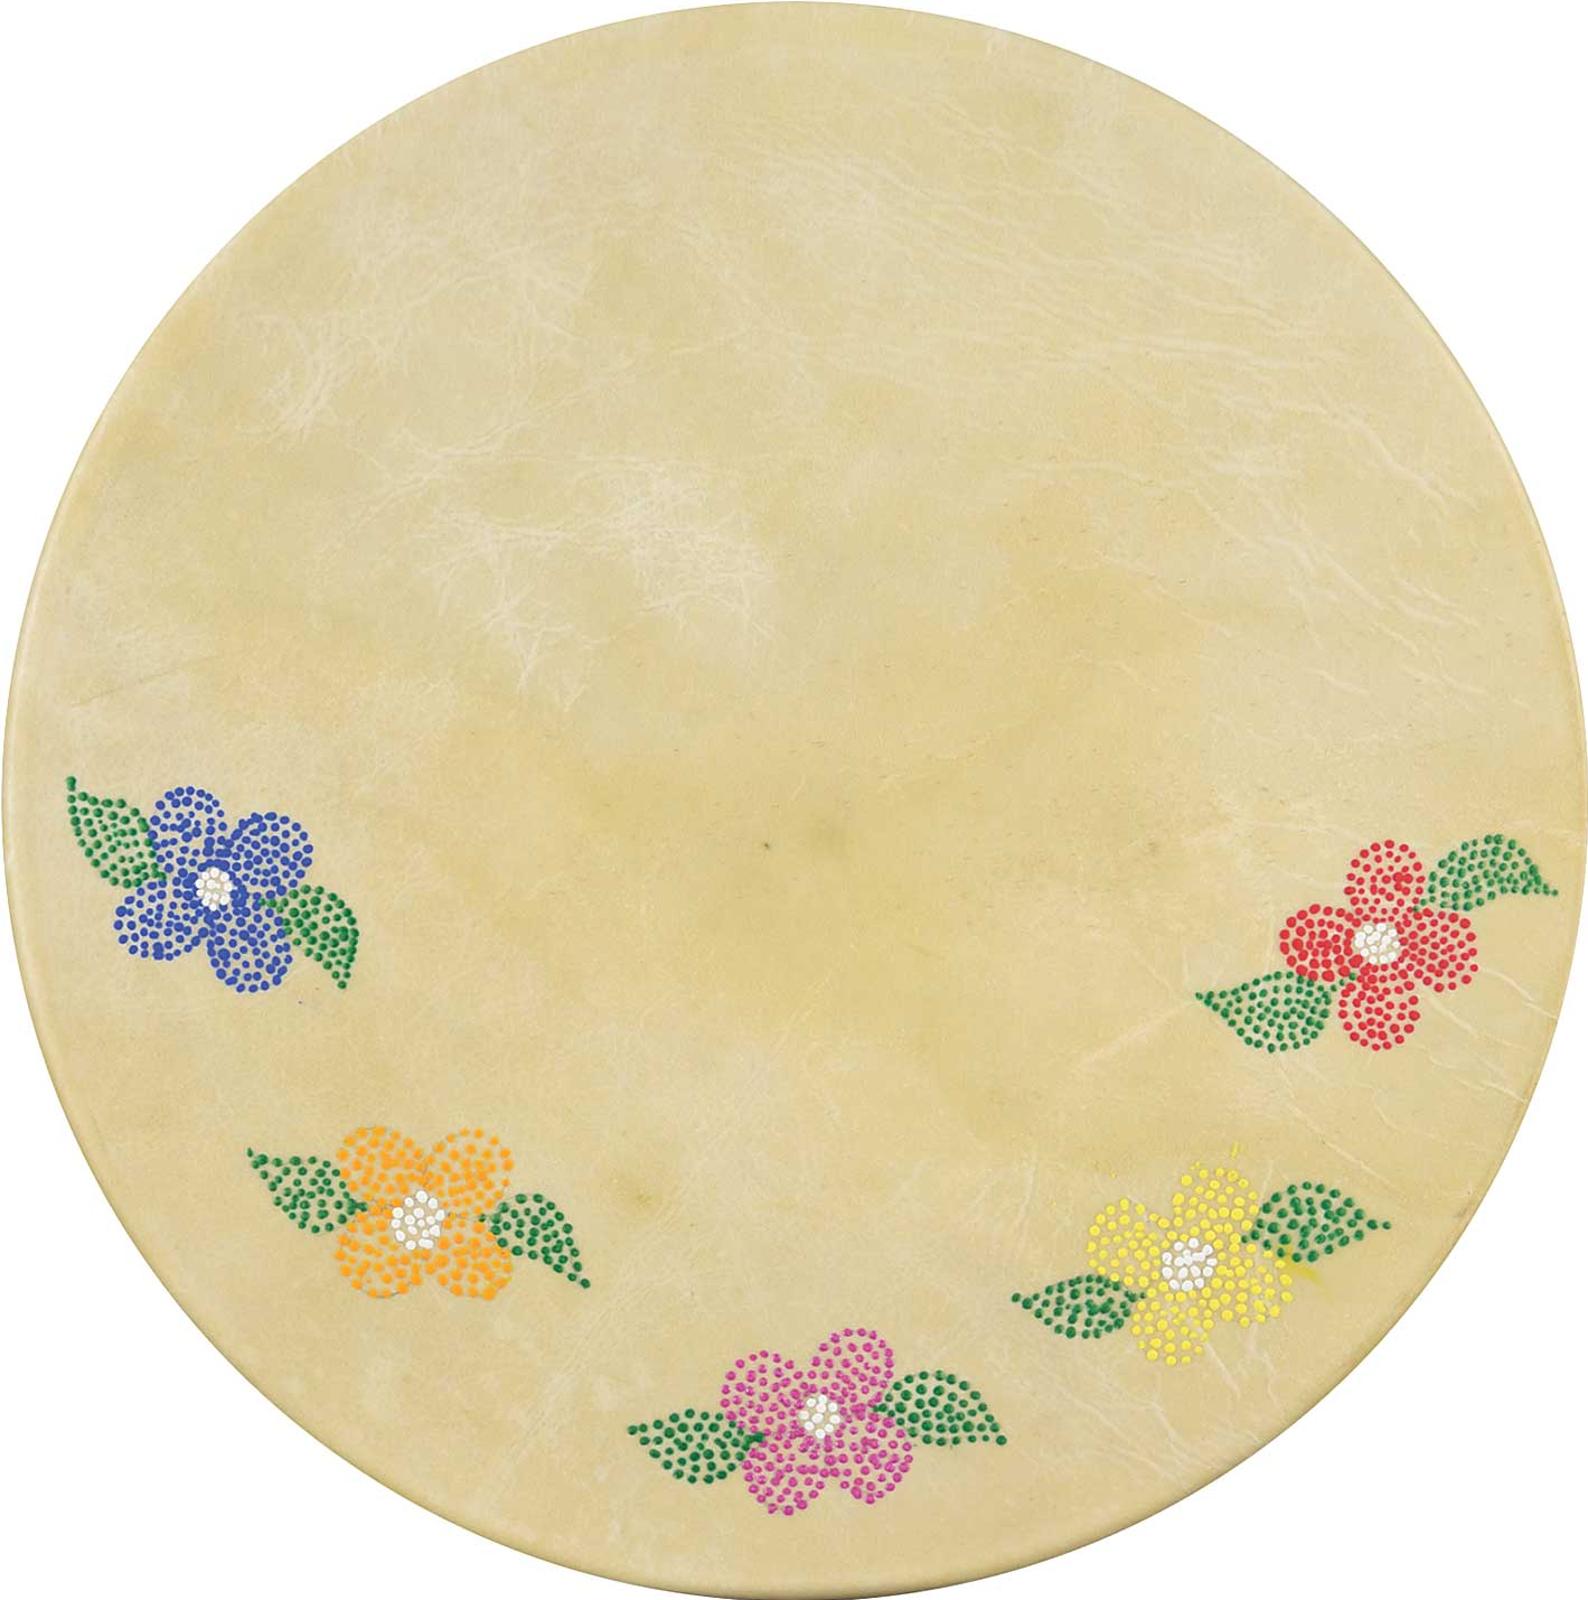 First Nations Basket School - Untitled - Floral Painted Drum